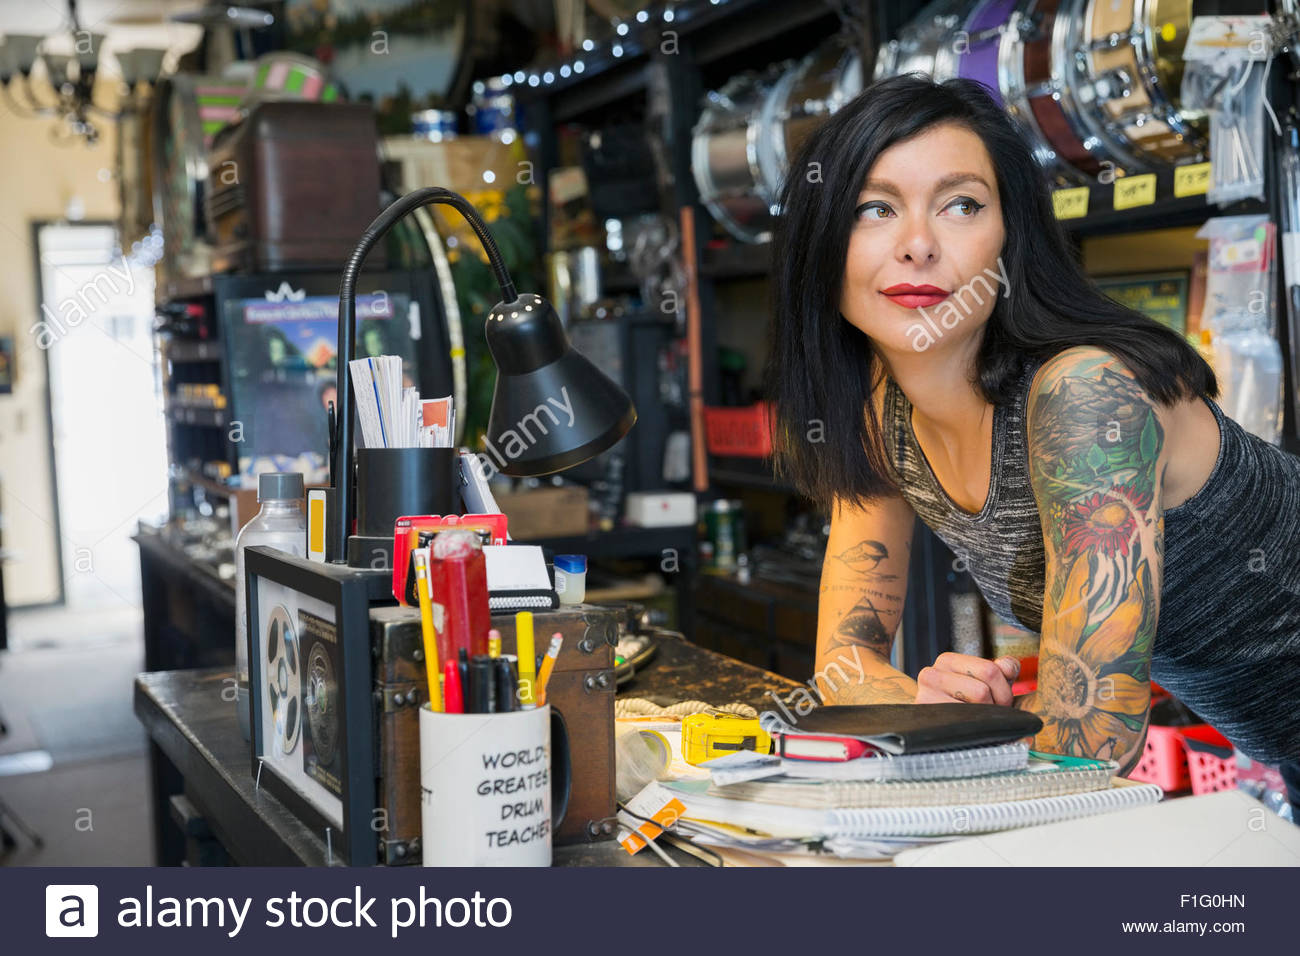 Music shop owner with tattoos leaning on counter Stock Photo